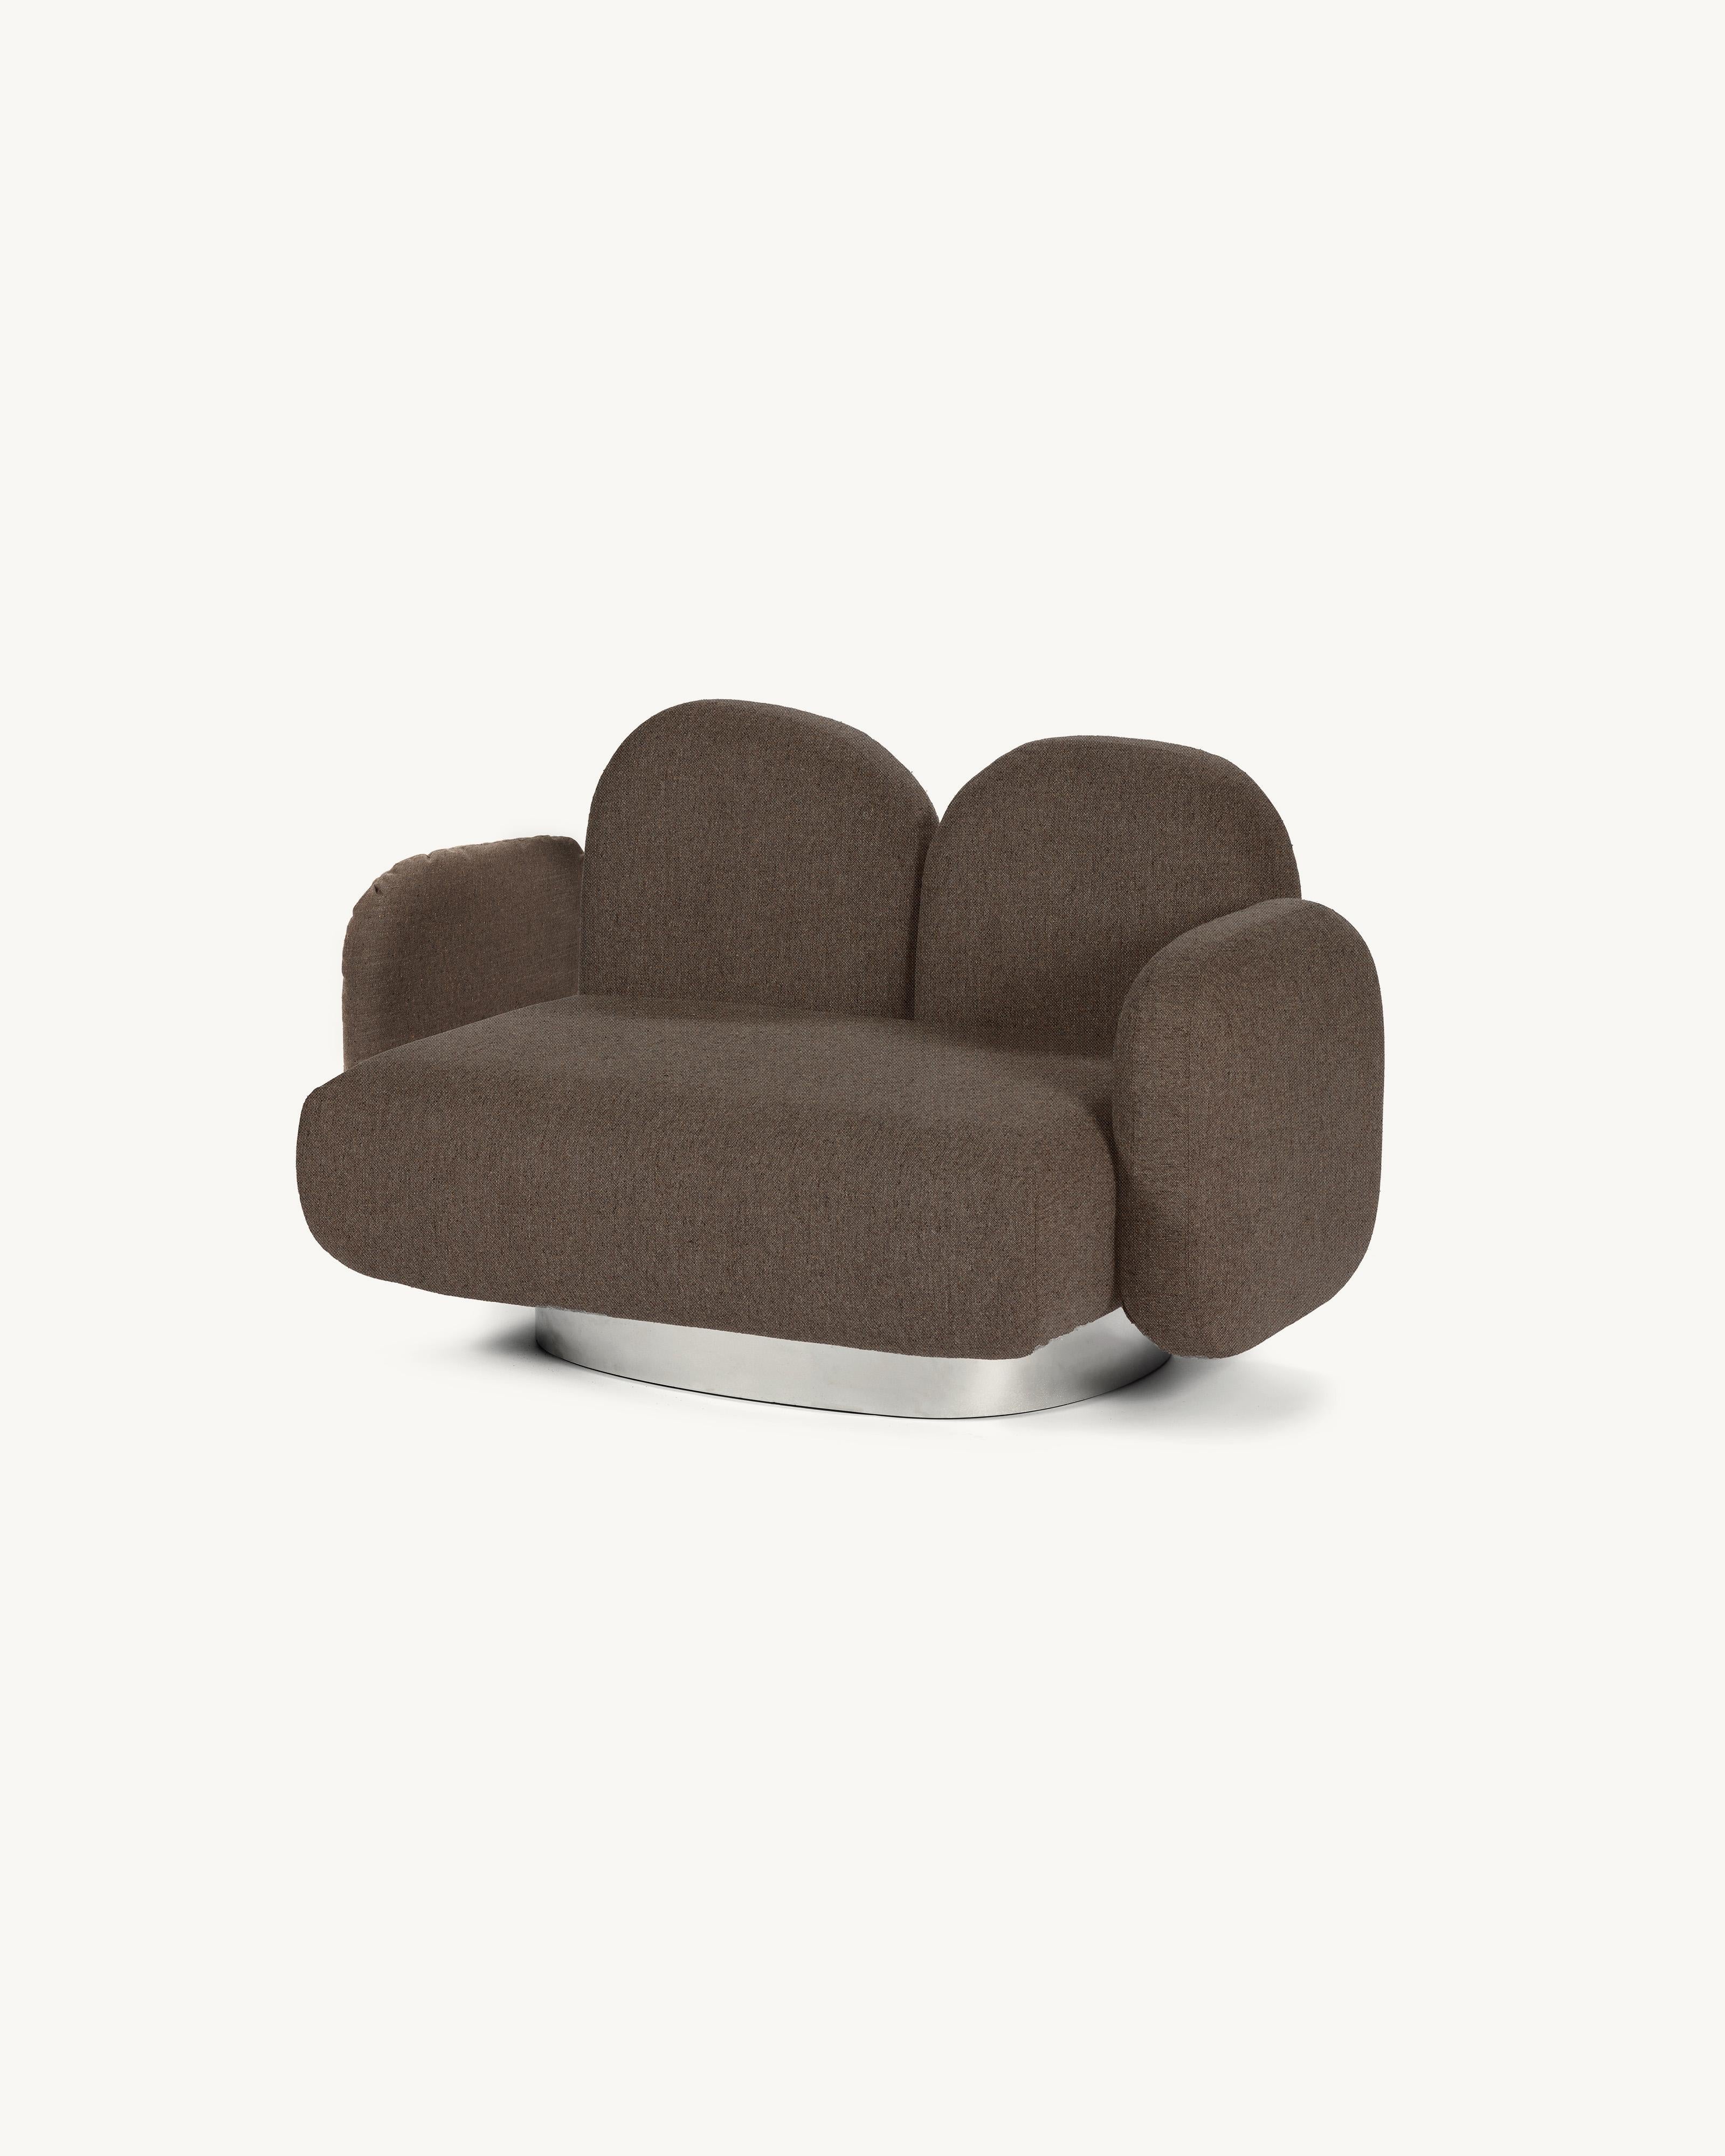 Modular Sofa Assemble 1-seat-sofa with 2 armrests 
Designed by Destroyers/Builders x Valerie Objects
Upholstery: Senales grey

Code: V9020321

Dimensions: L 87 W 143 H 85CM (SH 40 cm)
Materials: Wood, aluminium and upholstery

The ASSEMBLE sofa